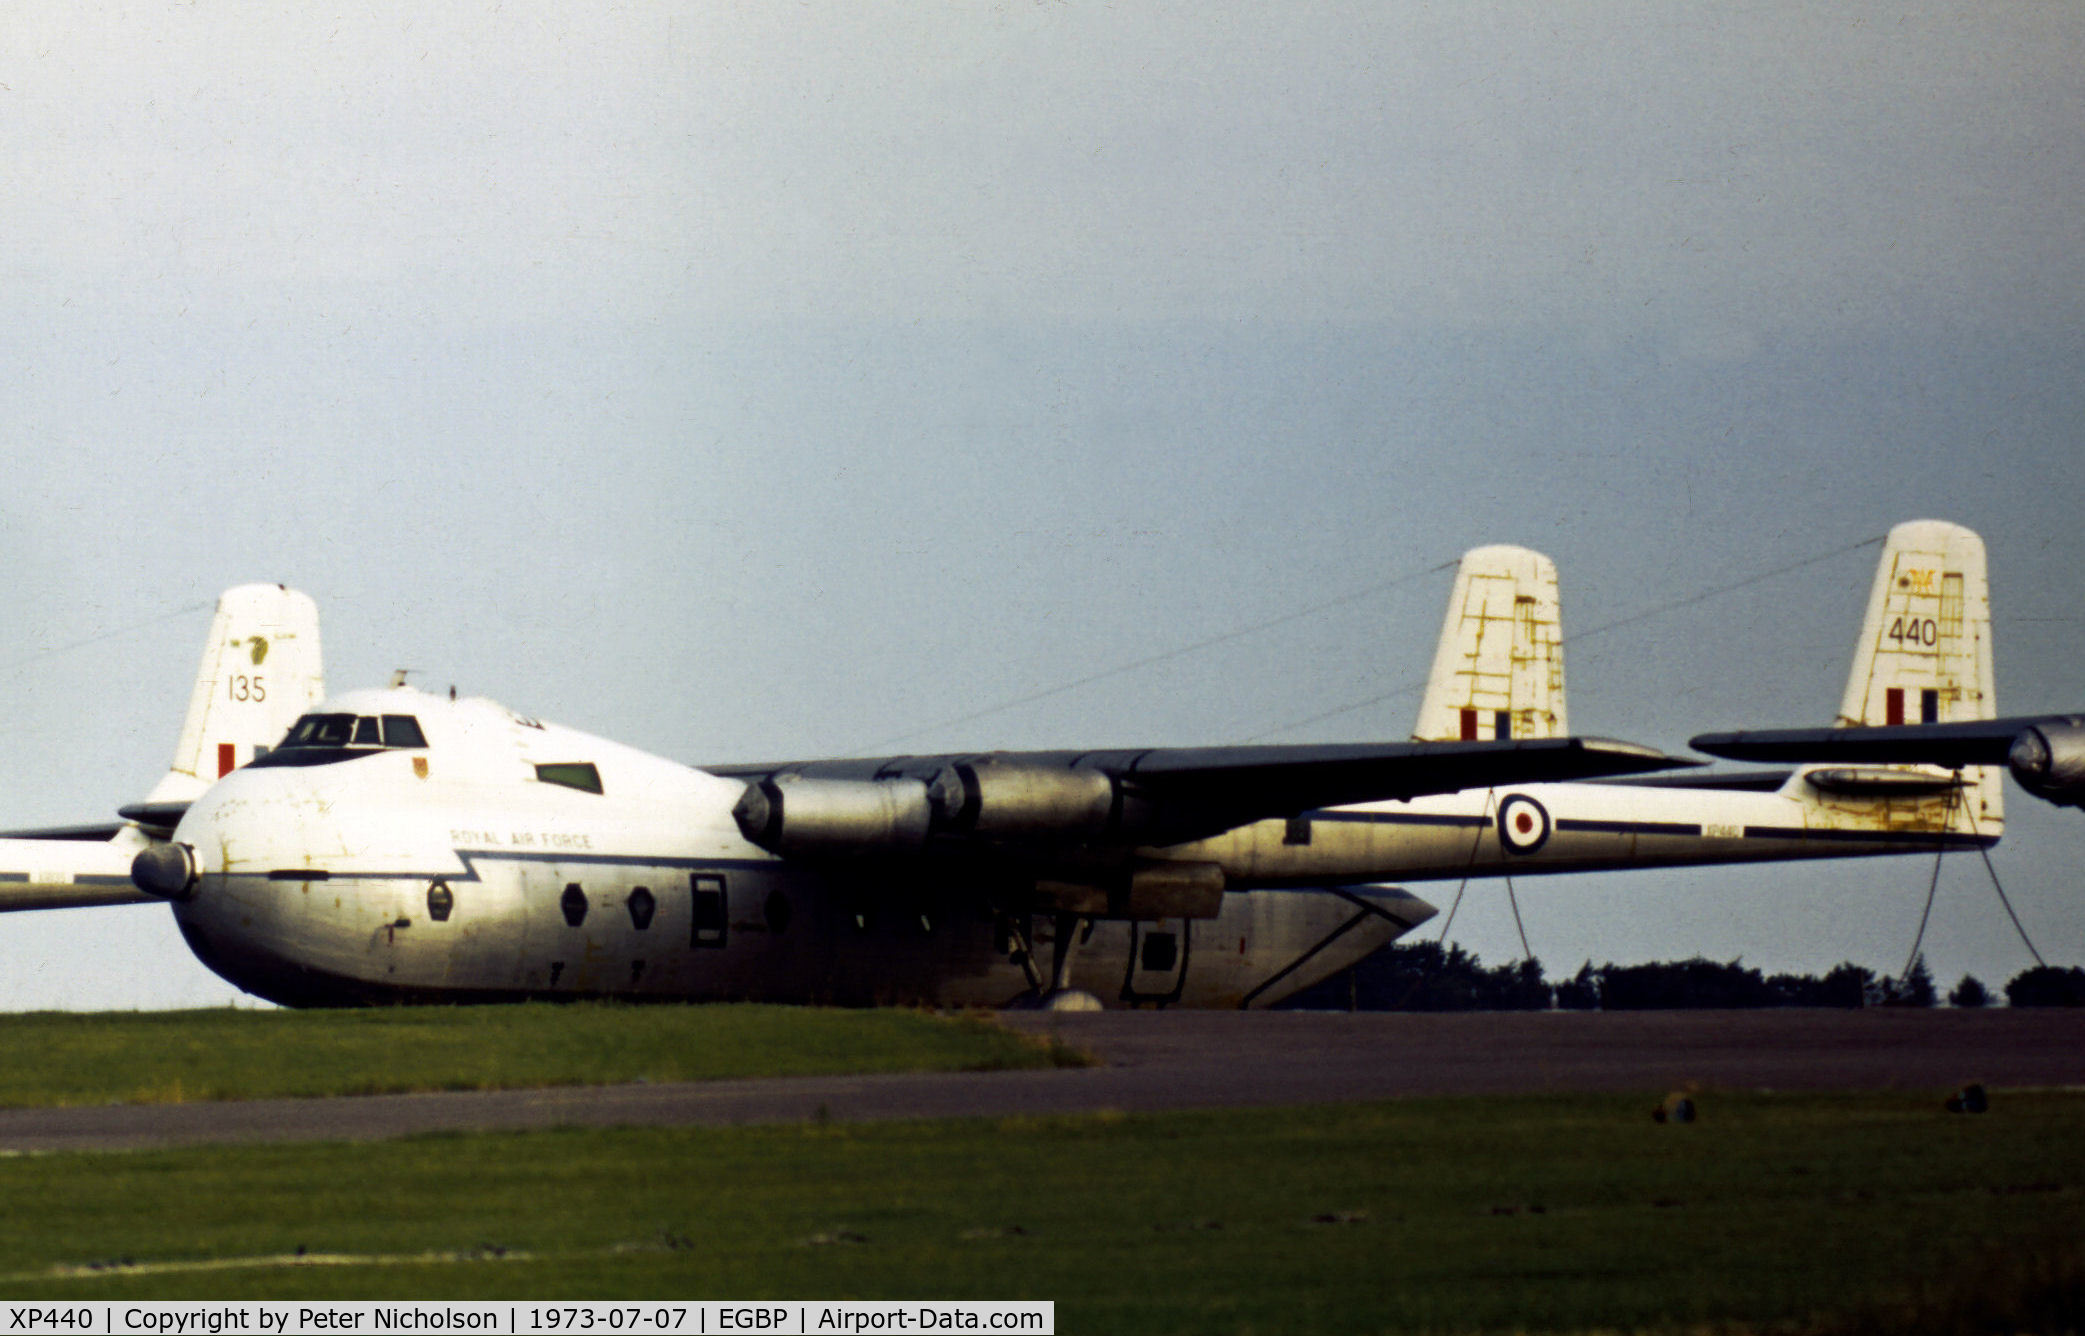 XP440, 1962 Armstrong Whitworth AW-660 Argosy C.1 C/N 6772, Argosy C.1 retired from active service awaiting disposal at 5 Maintenance Unit at RAF Kemble in the Summer of 1973.